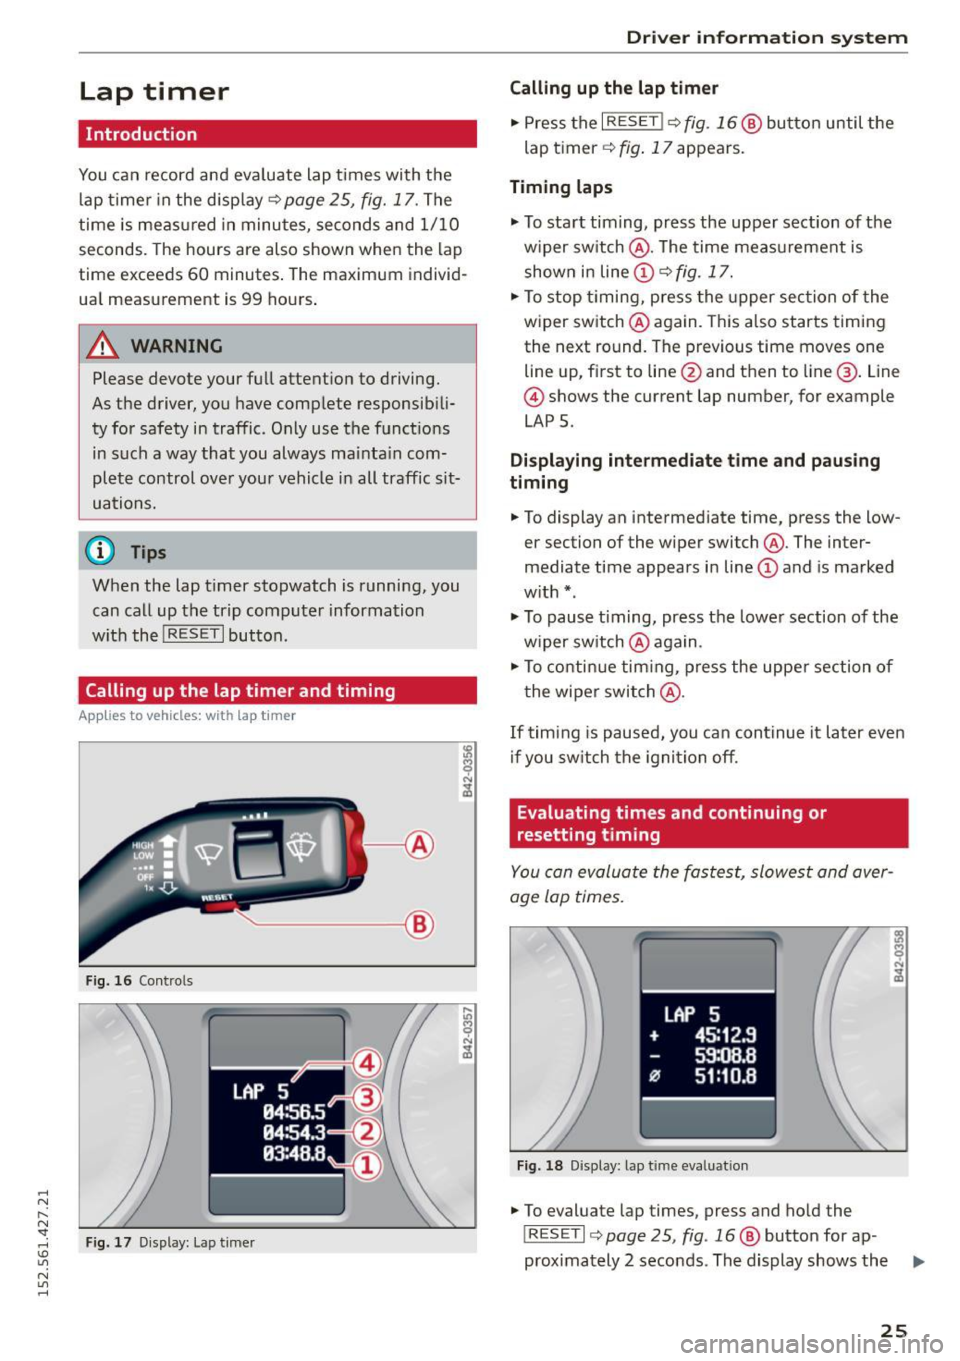 AUDI R8 SPYDER 2015  Owners Manual .... N 
l­
N "1: .... I.O 
" N 
" .... 
Lap  timer 
Introduction 
You can record and evaluate  lap times  with  the 
lap timer  in the  display¢ 
page 25, fig.  17. The 
time  is measured  in min